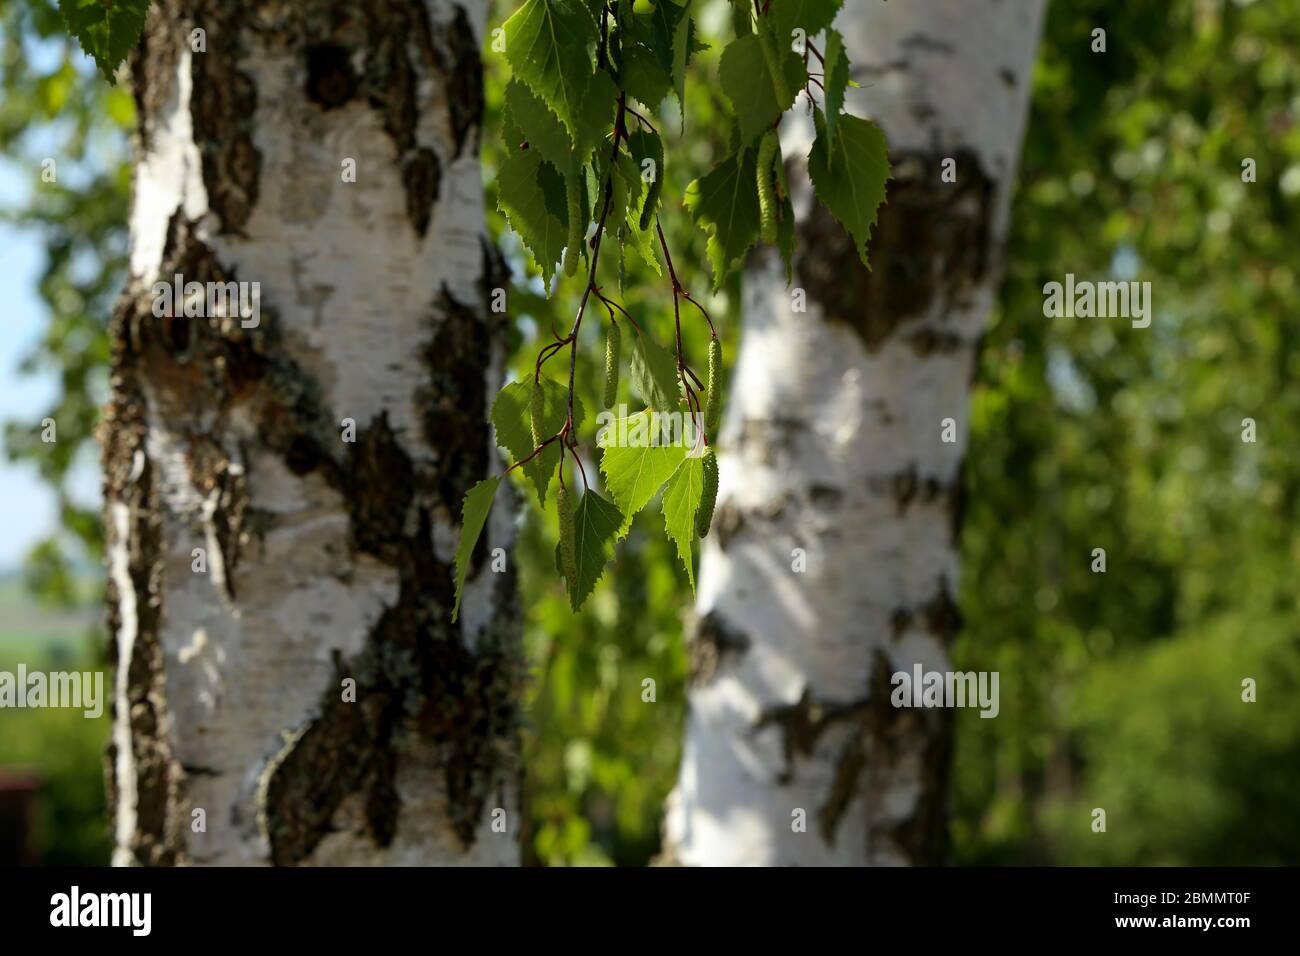 Birch branch with foliage and earrings on a background of white trunks Stock Photo